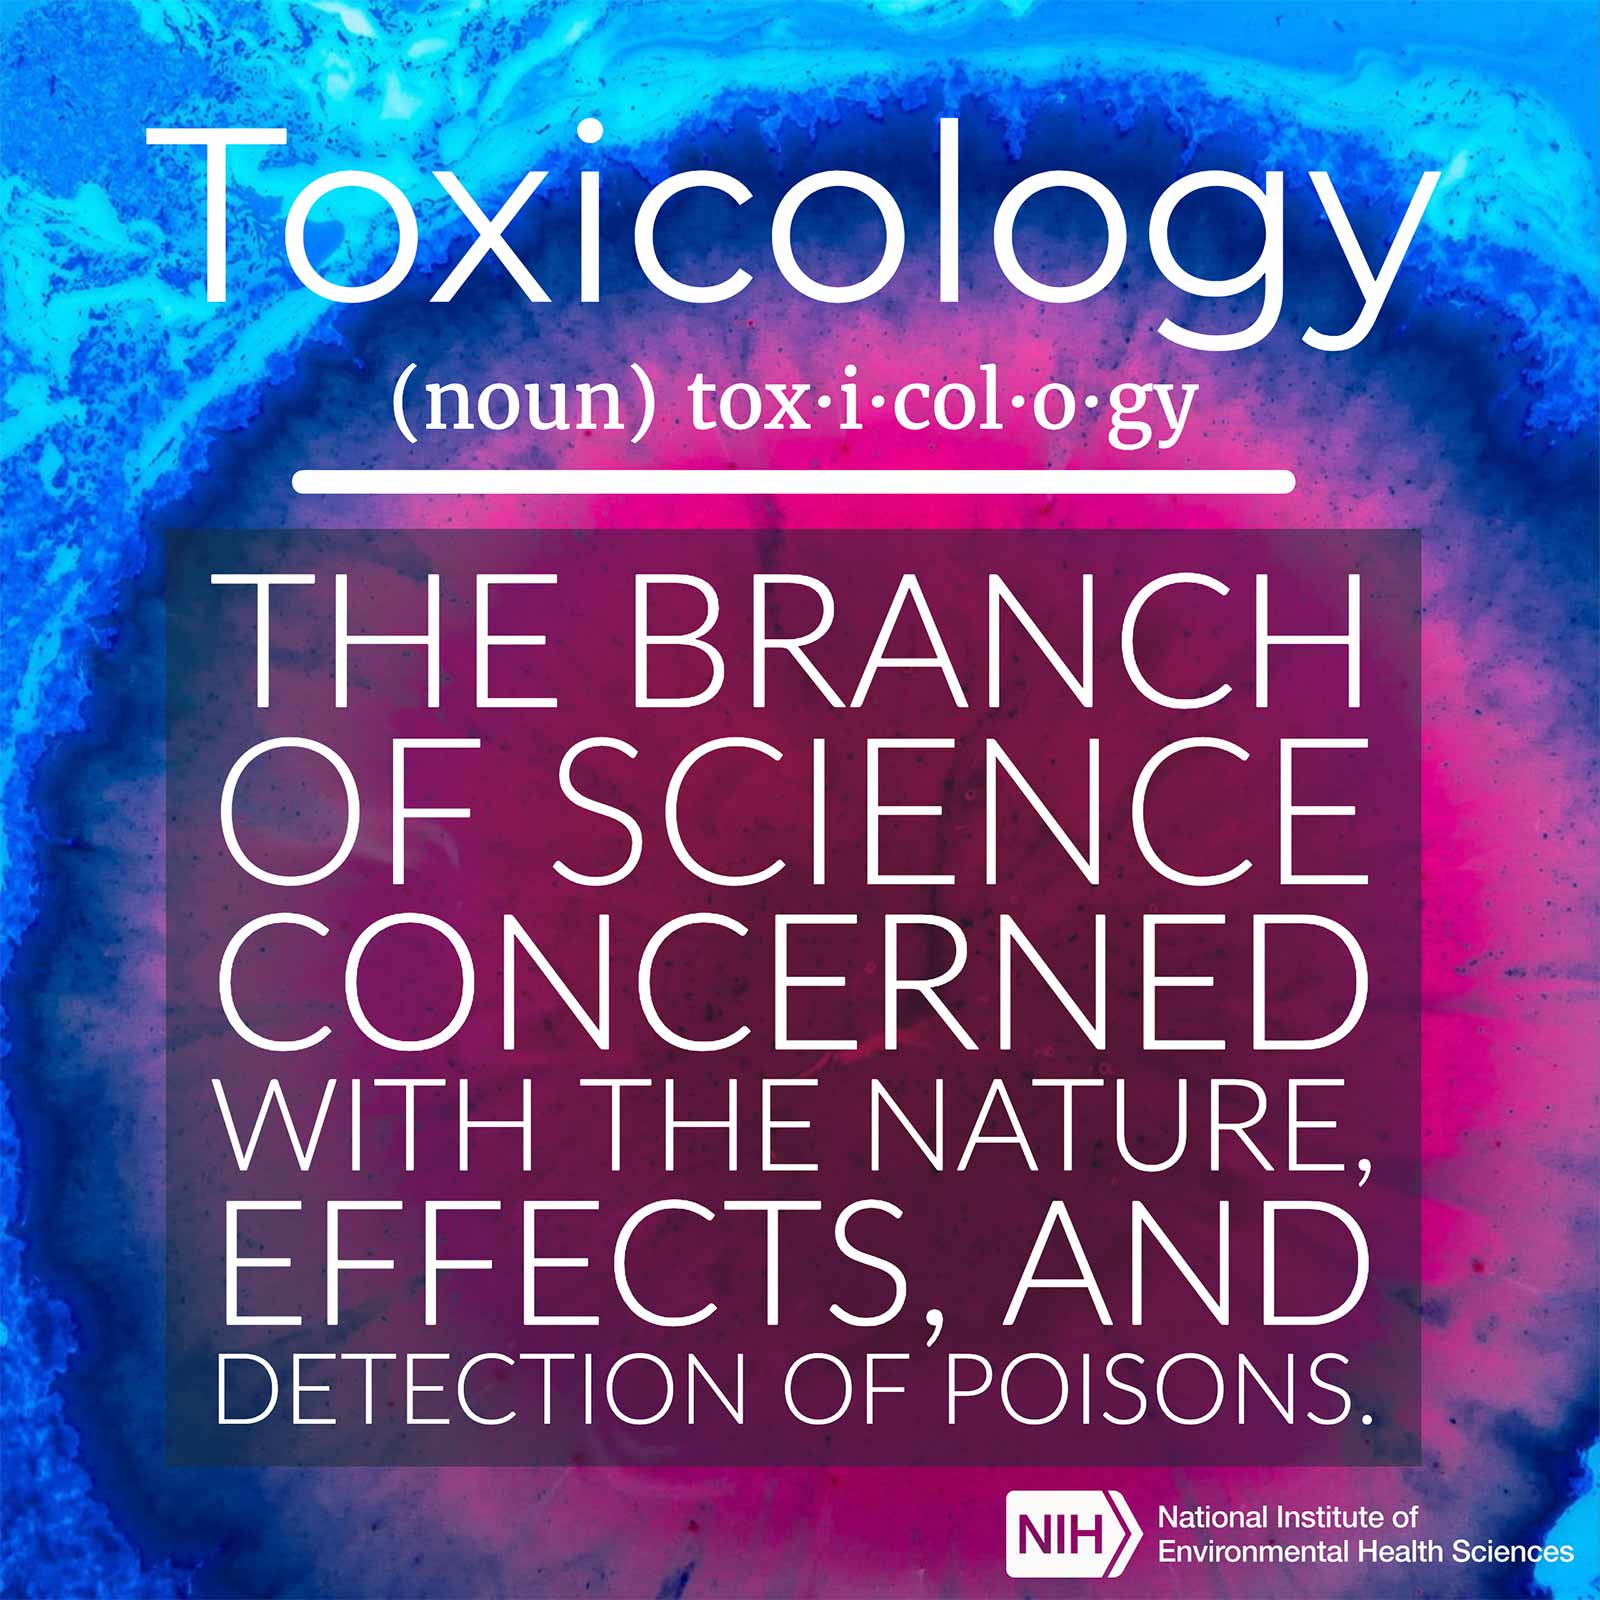 Toxicology (noun) defined as 'the branch of science concerned with the nature, effects, and detection of poisons.'